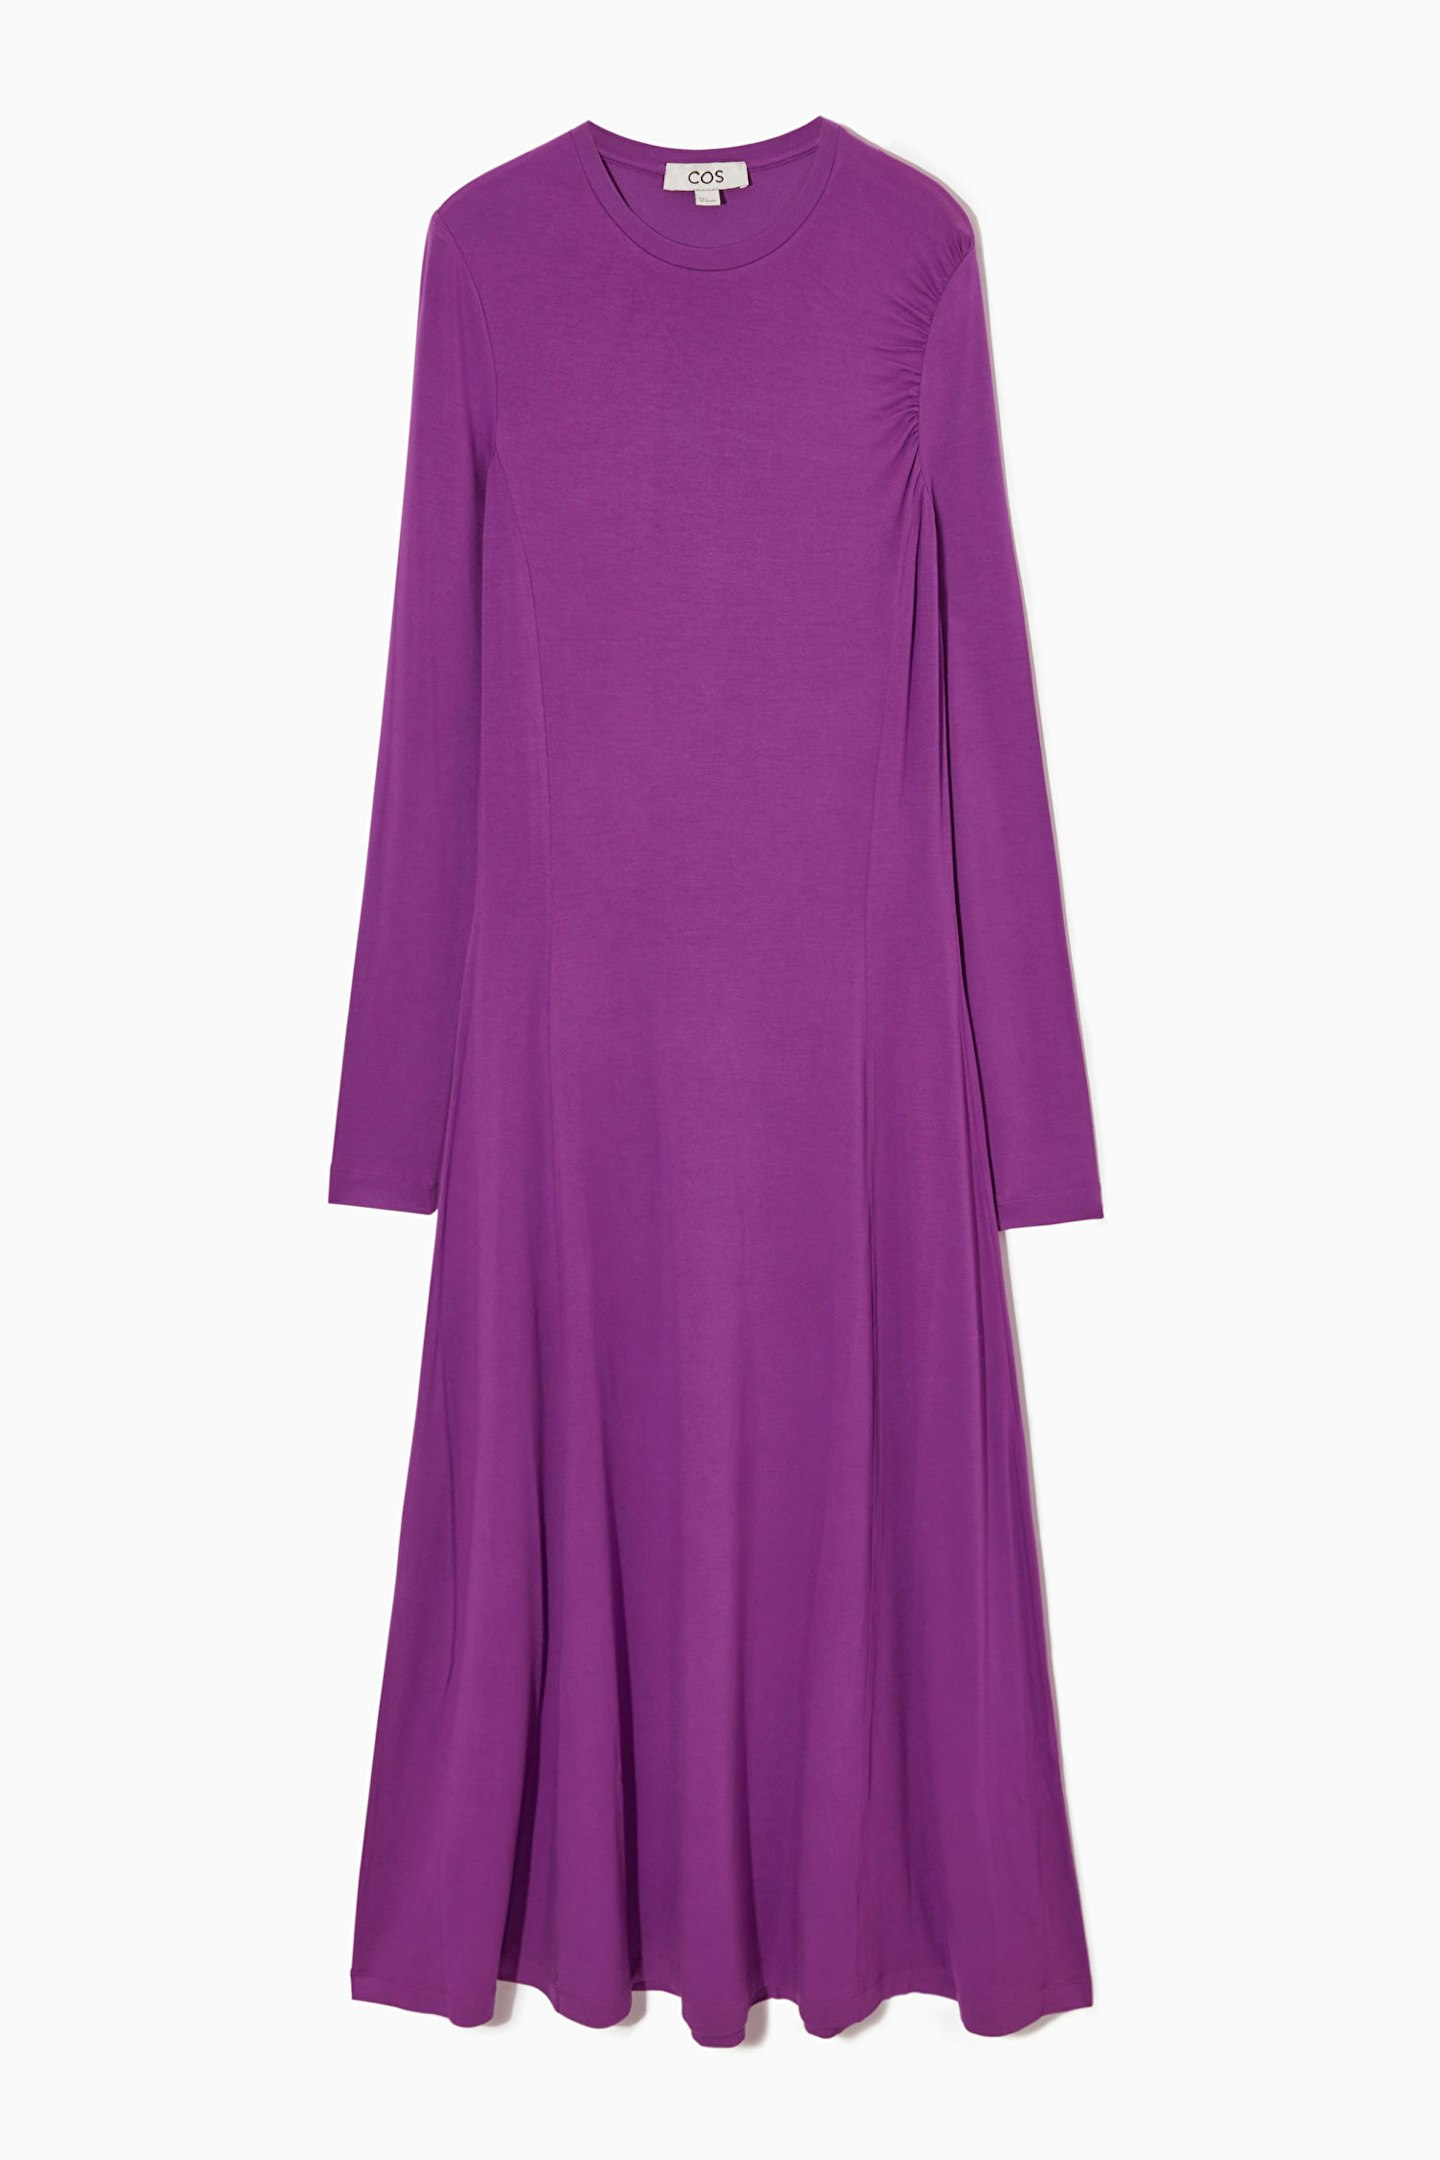 COS, Long-Sleeved Gathered Jersey Midi Dress